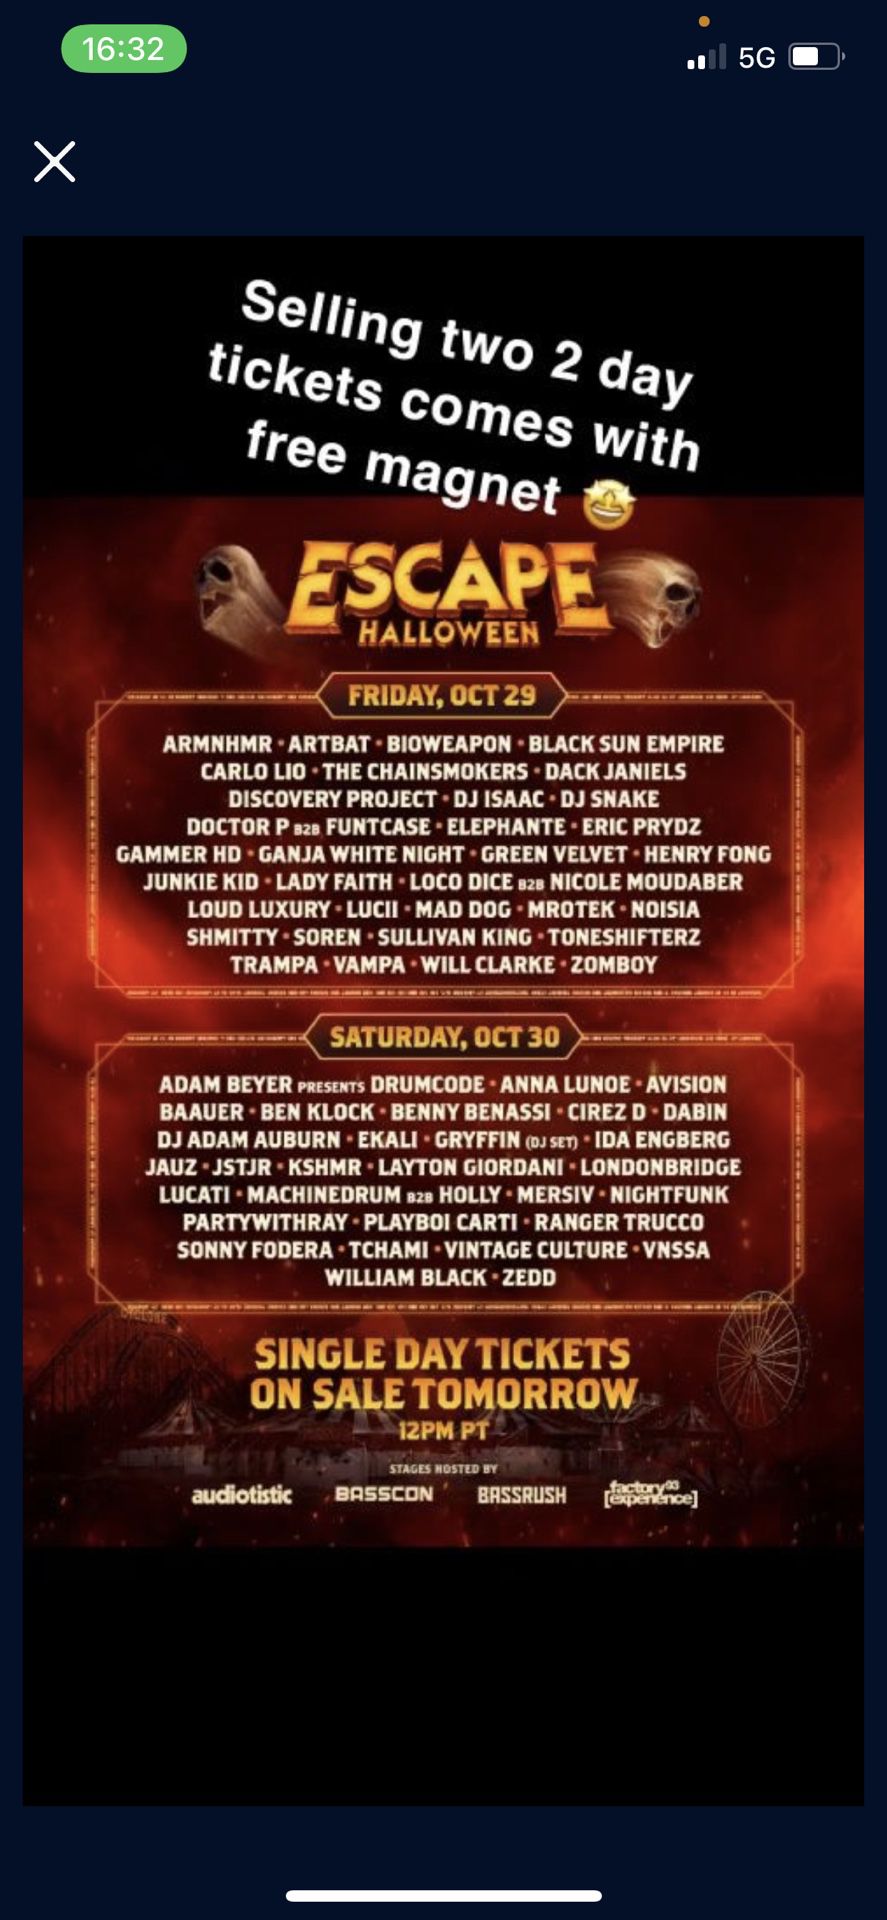 ONE ESCAPE HALLOWEEN (two day) TICKET 